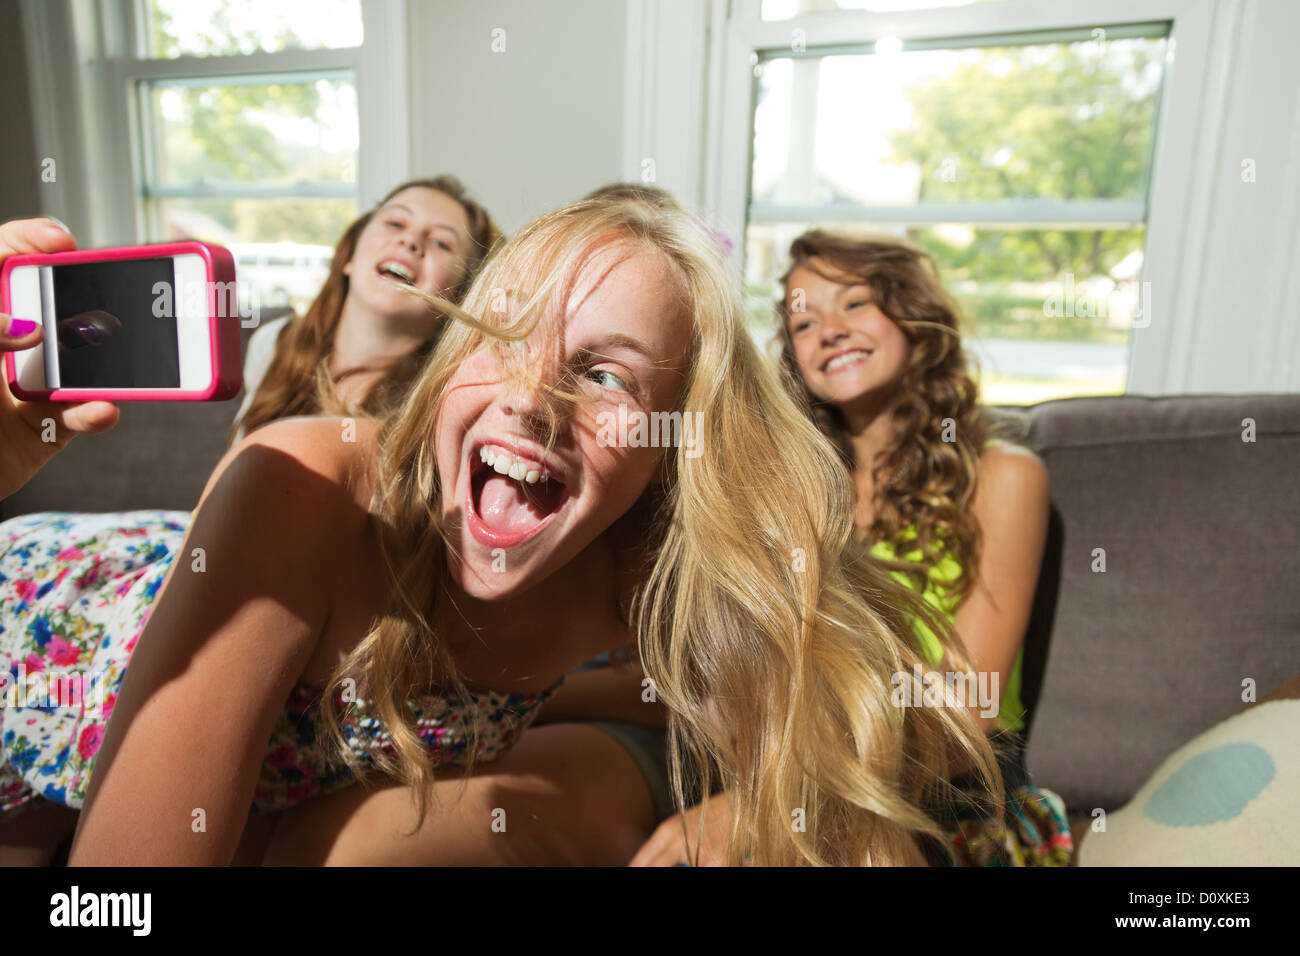 Group of girls being photographed with camera phone Stock Photo - Alamy